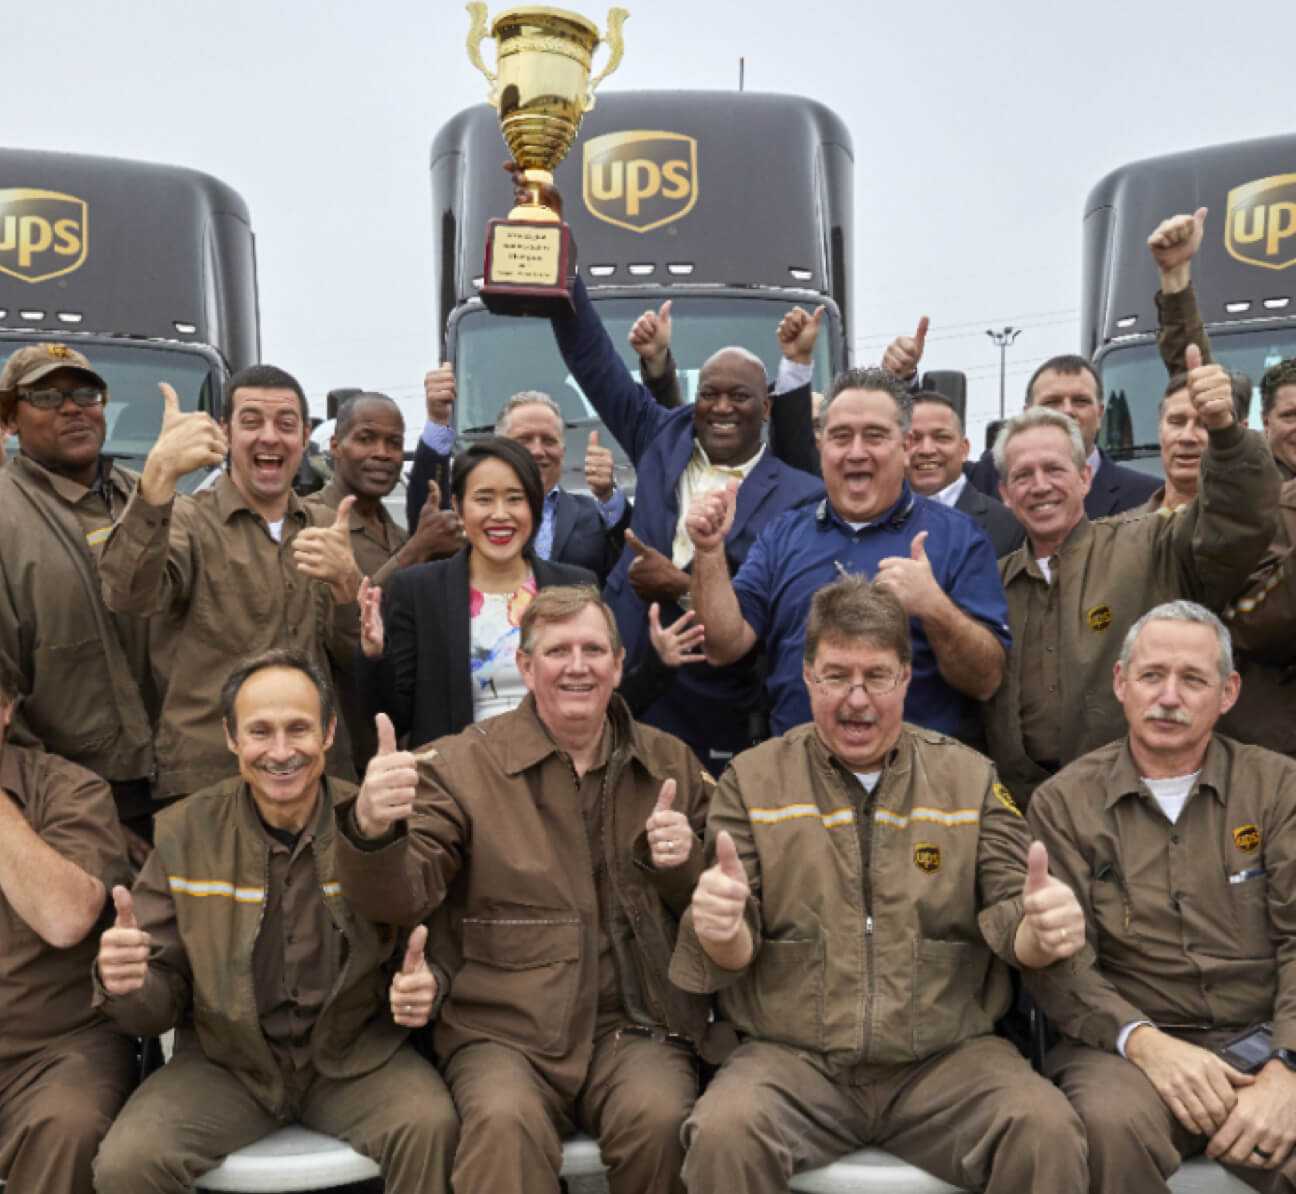 UPS workers holding a trophy